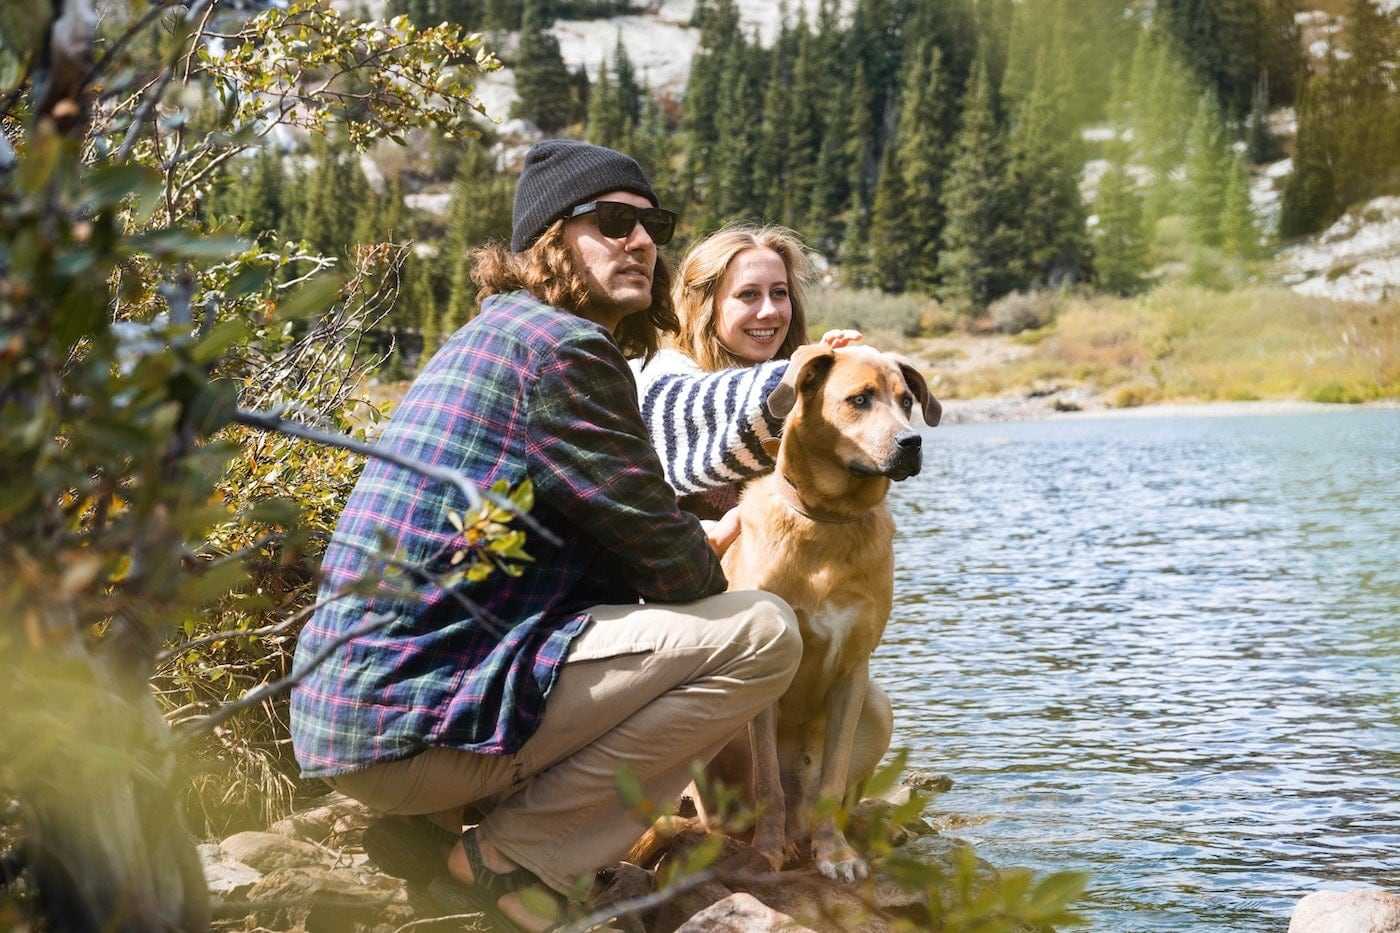 A couple with their dog outdoors.